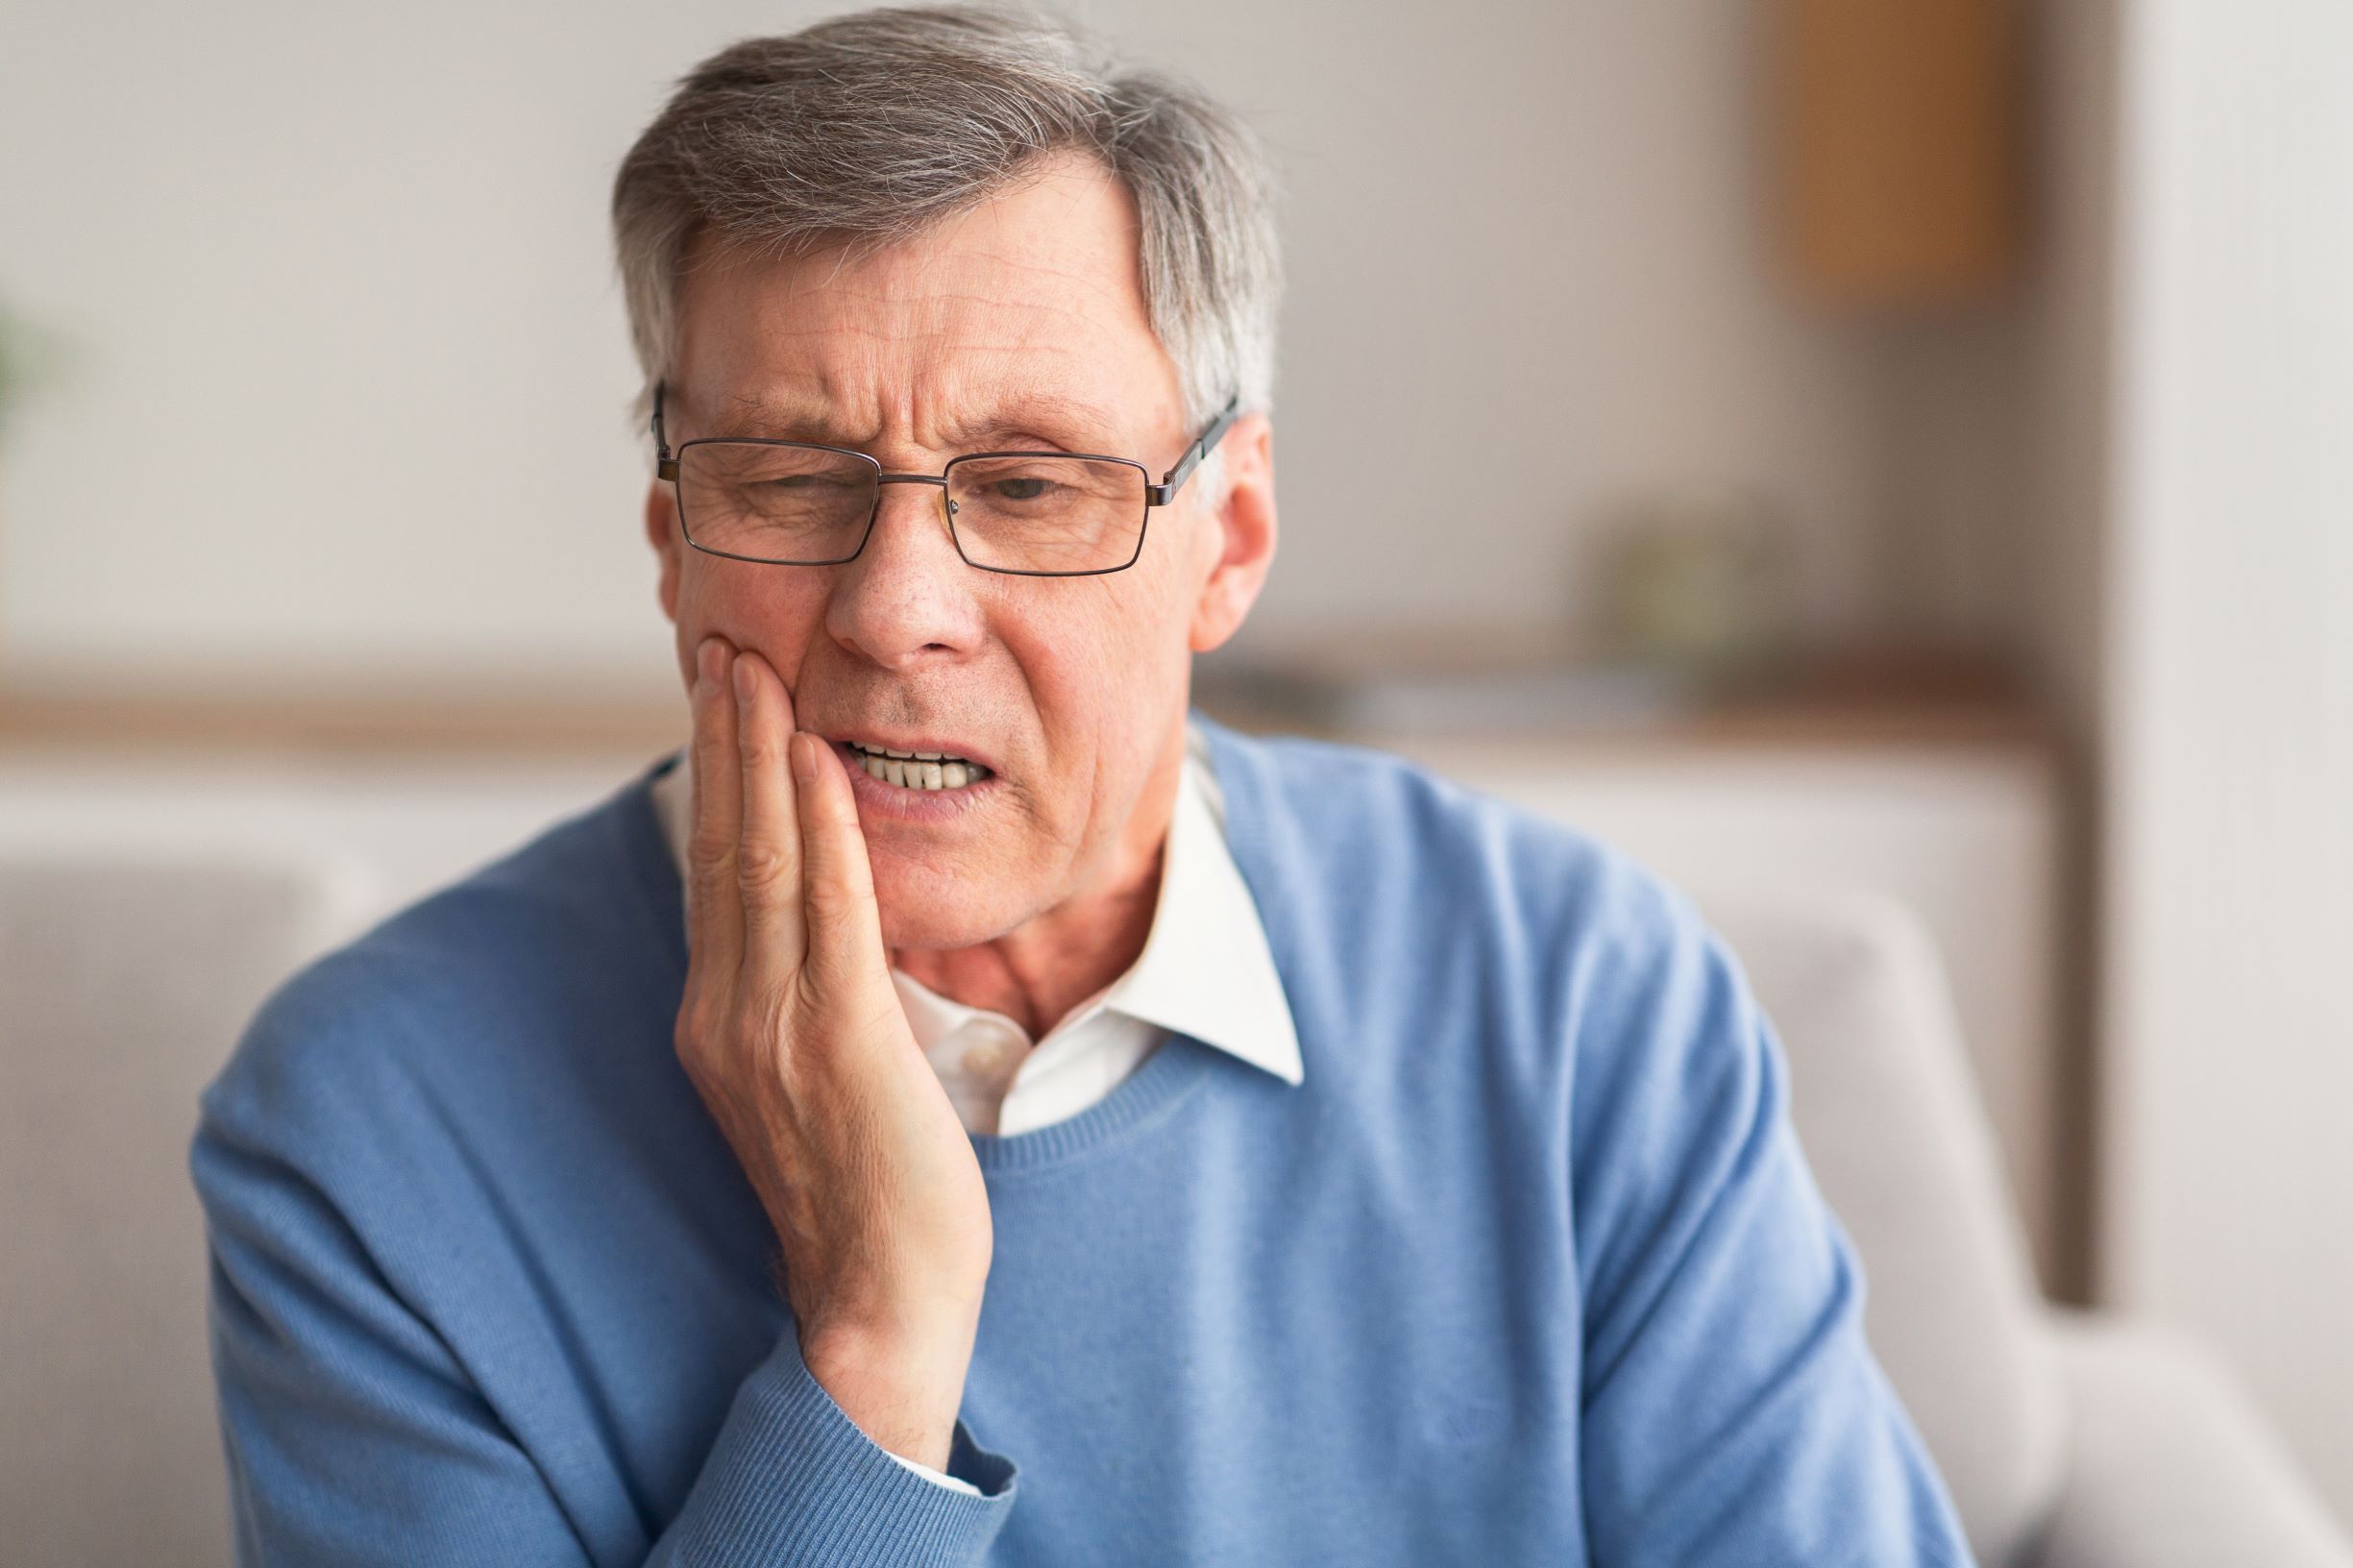 What is a tooth abscess? How is a tooth abscess treated? If you are experiencing dental pain like the man in this image, you may wish to ask our Grosse Pointe dentist if you have a tooth infection.